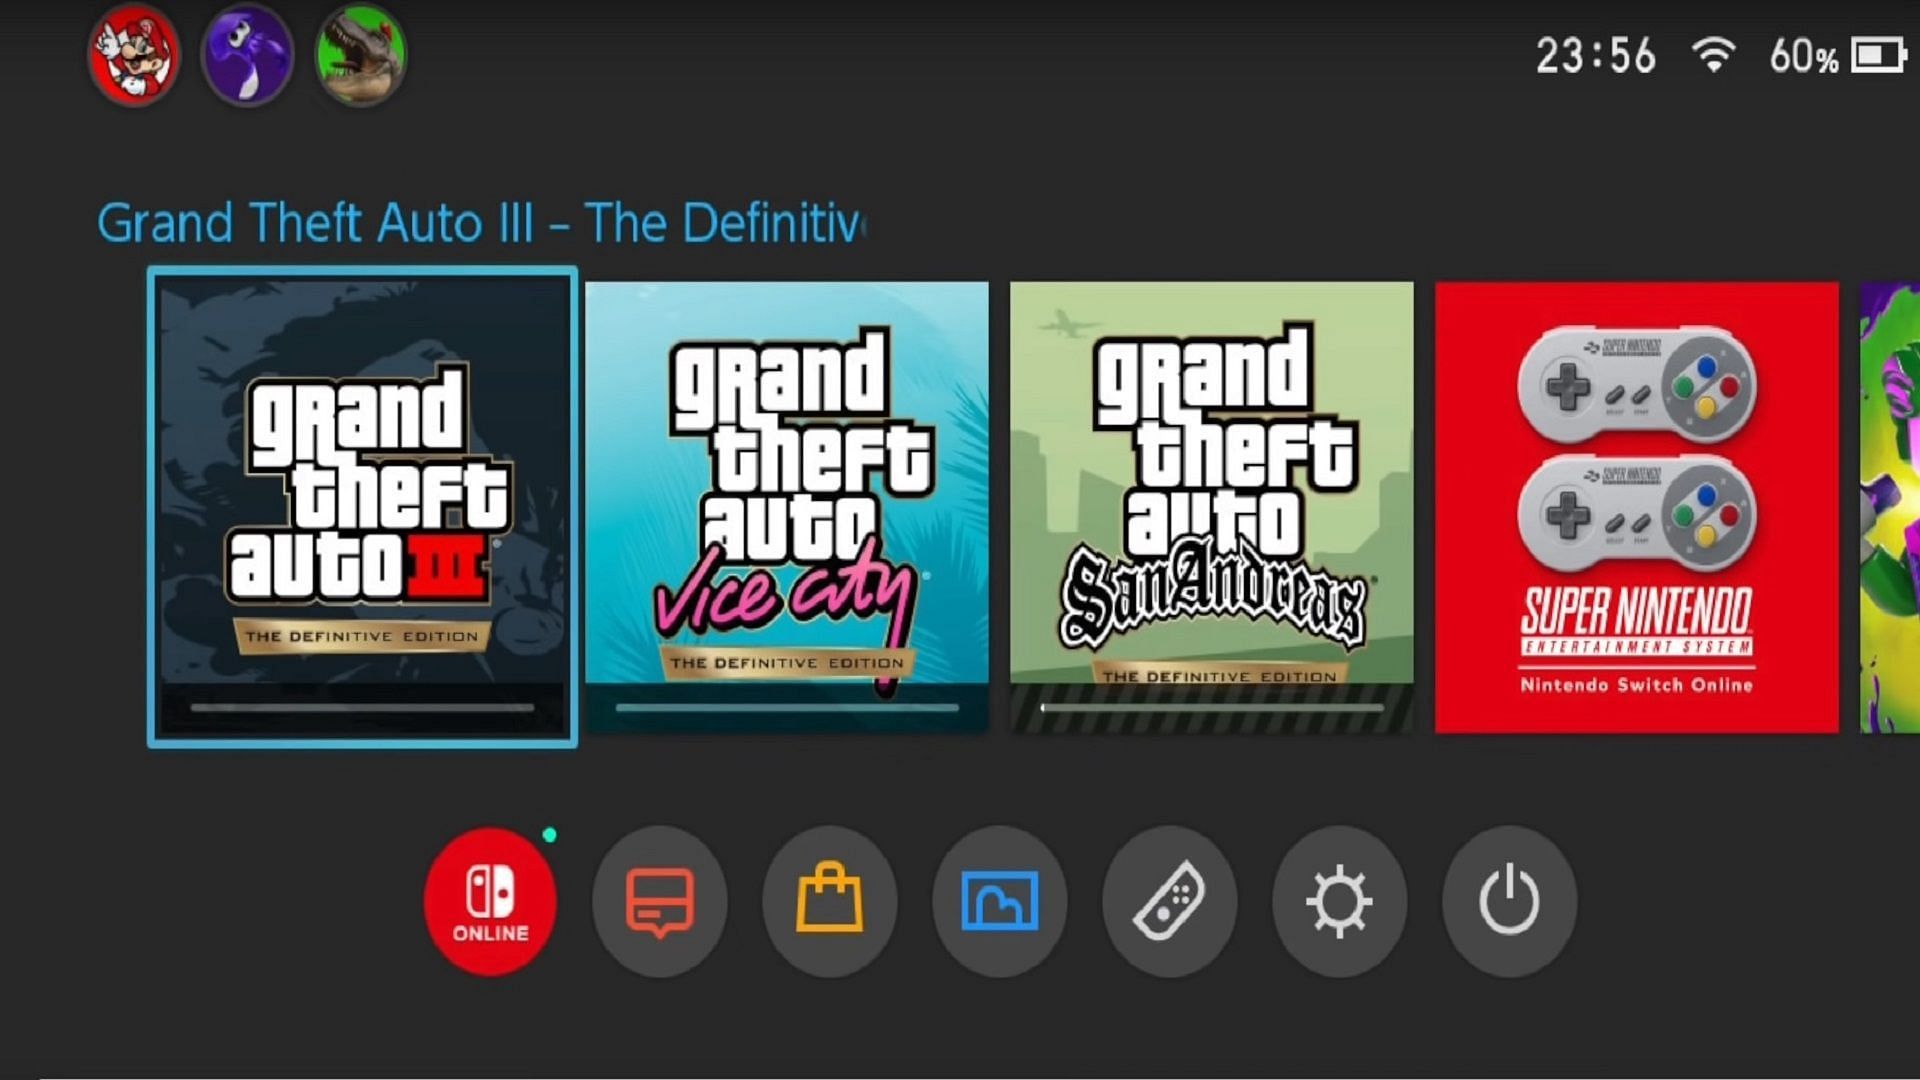 The GTA Trilogy update queued on the Switch (Image via MrBossFTW/YouTube)